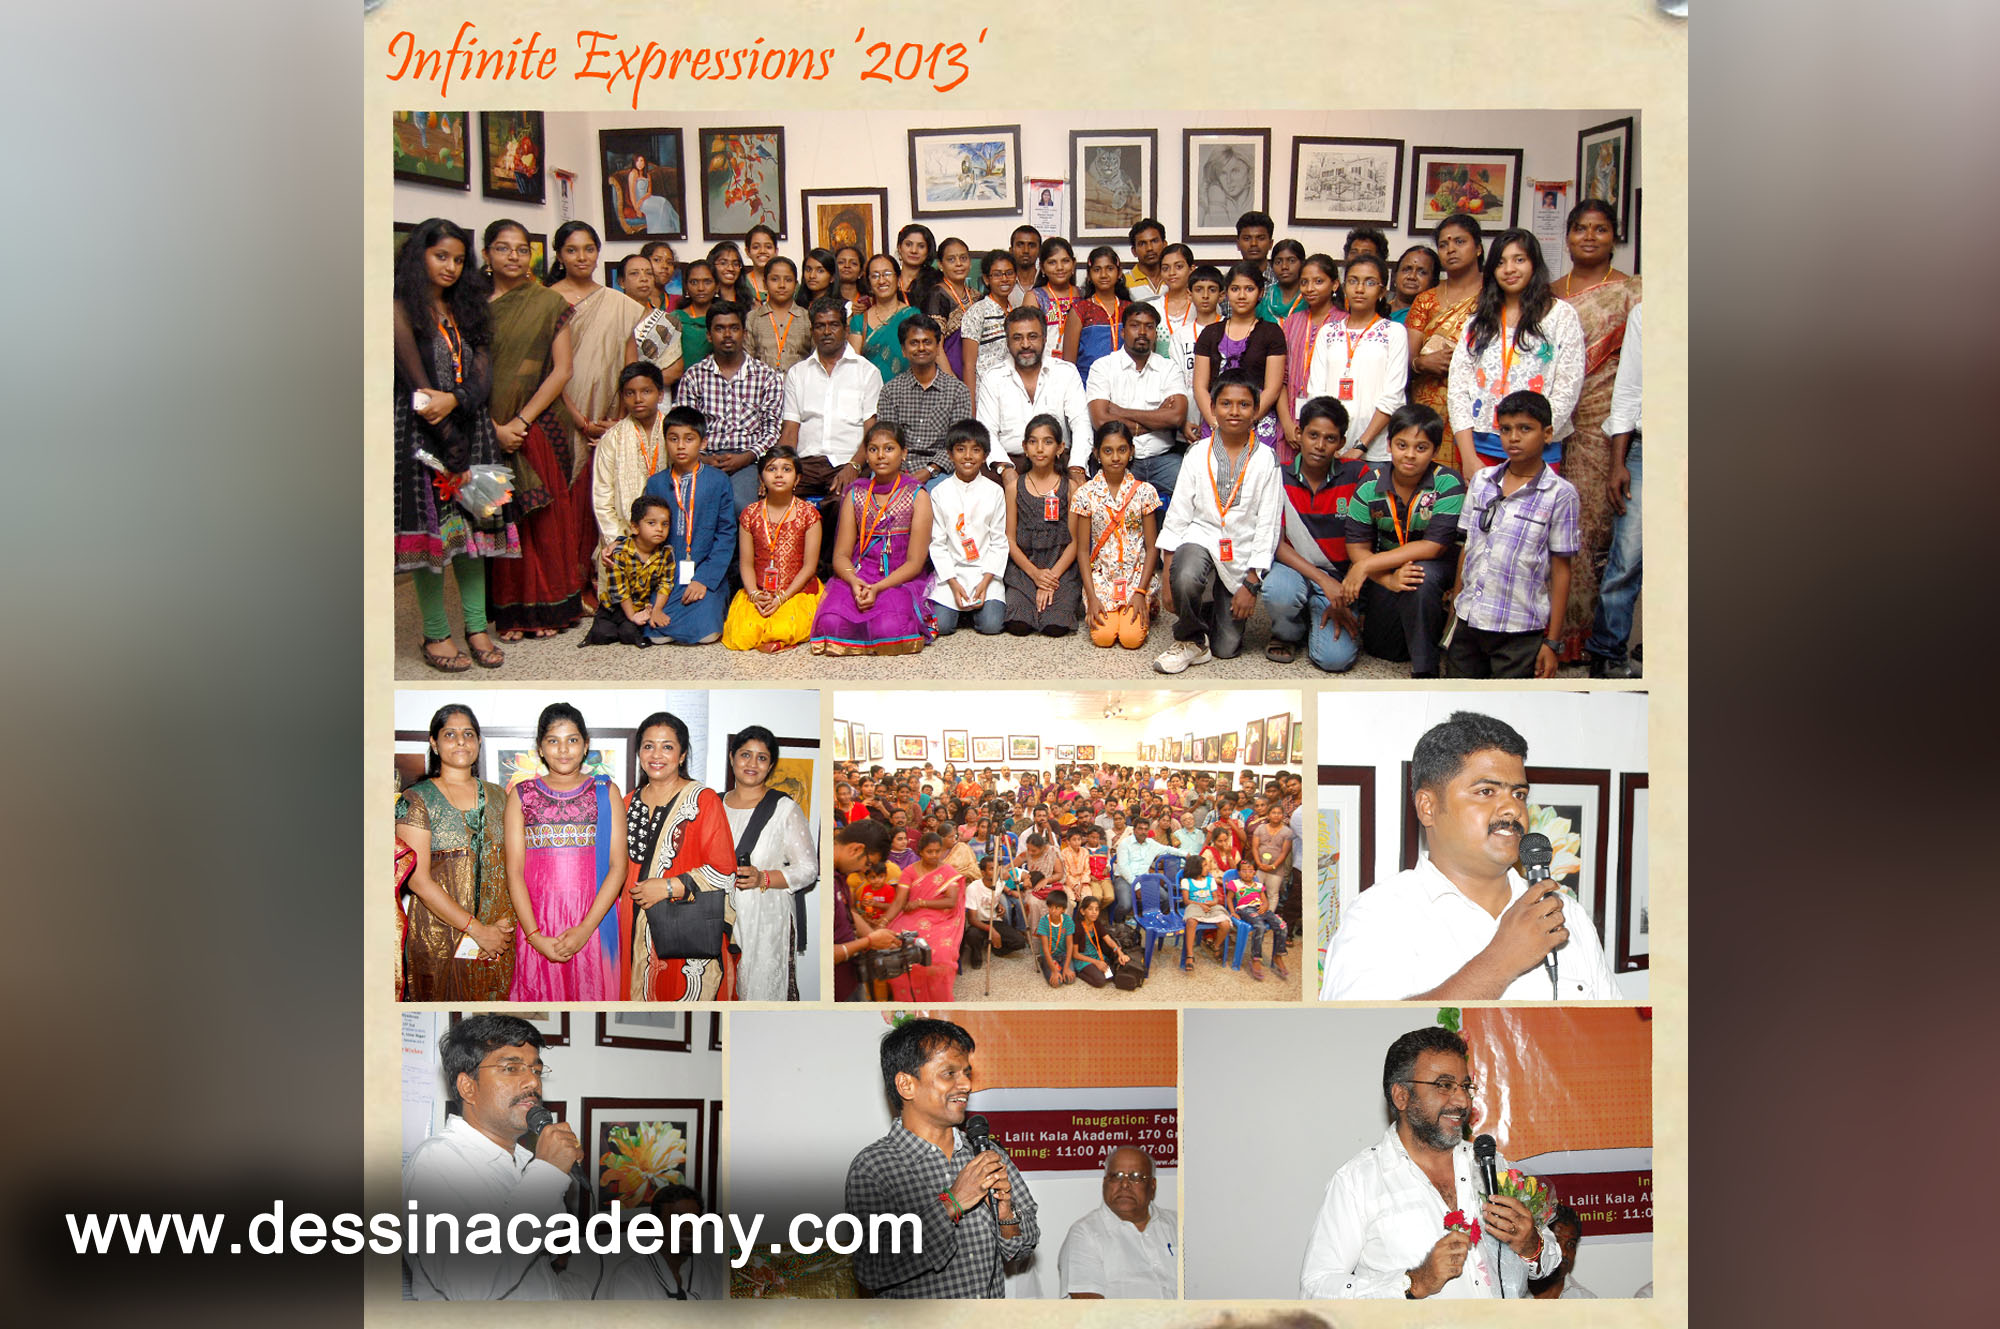 Dessin School of arts Event Gallery 3, Painting Coaching in PerungalathurDessin School of Arts